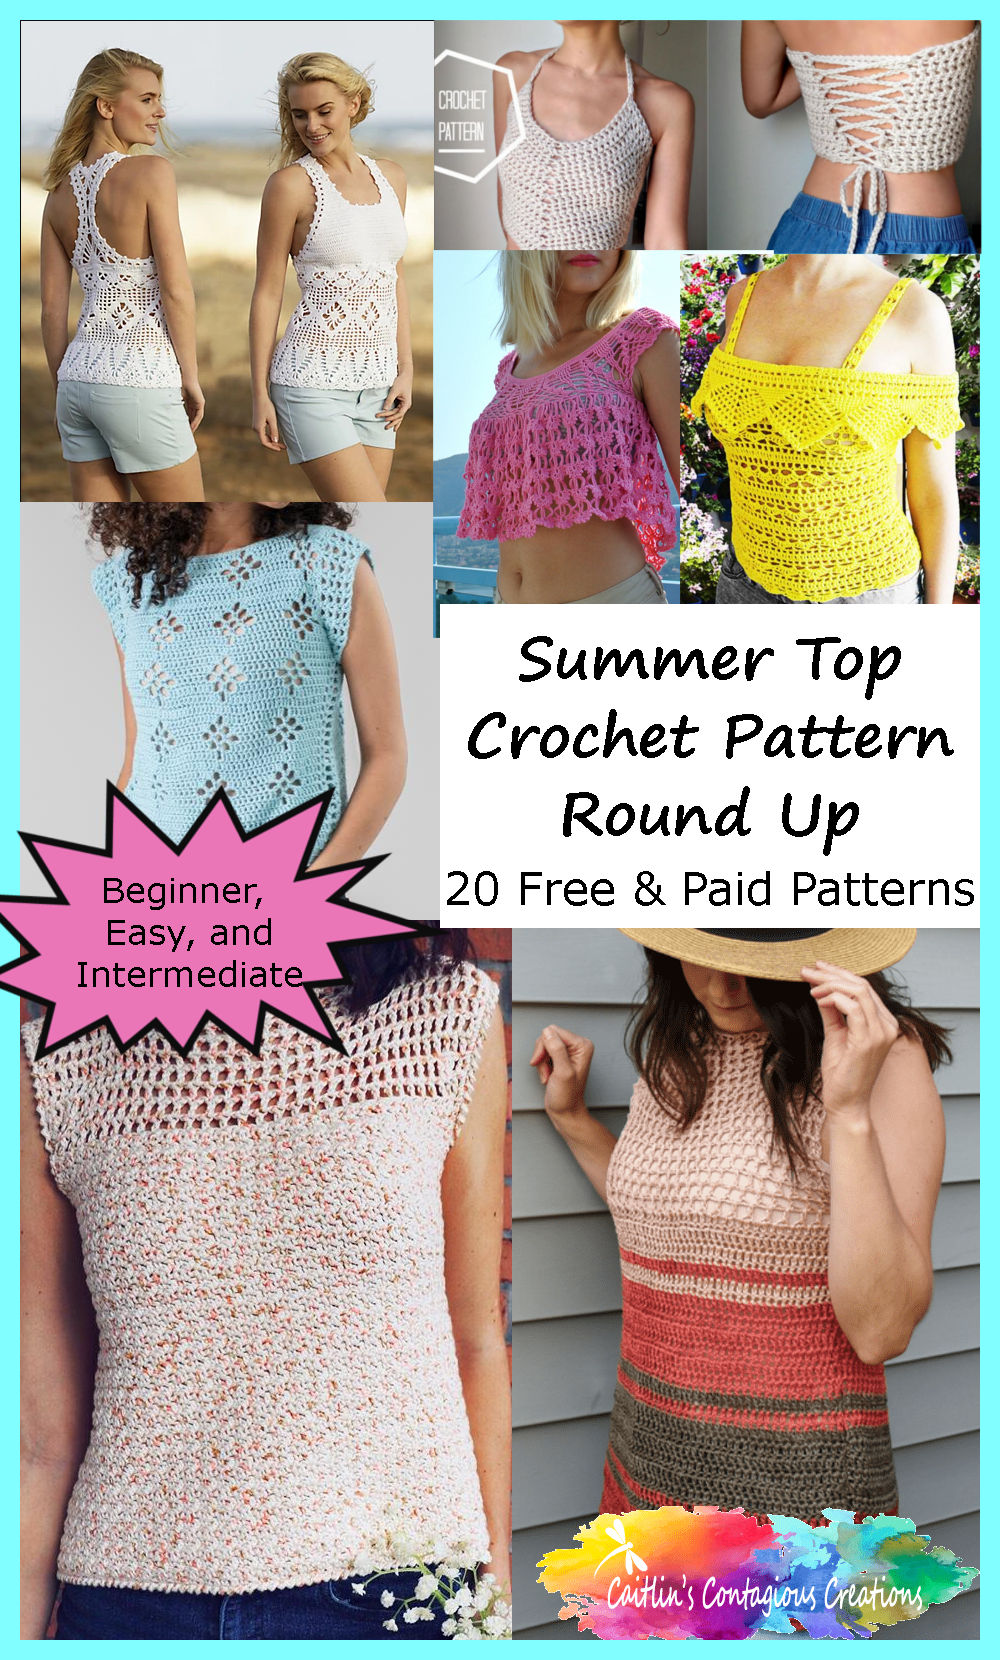 A collection of summer shirt crochet patterns from Caitlin's Contagious Creations. Summer tops, tees, tanks, halters, crop tops, and swim suit cover ups for beginner, easy, and intermediate levels. This summer top round up includes free and paid patterns that are simple yet elegant. Select your favorite now! #SummerTopCrochetPattern #HalterCrochetPattern #SummerCrochetRoundUp